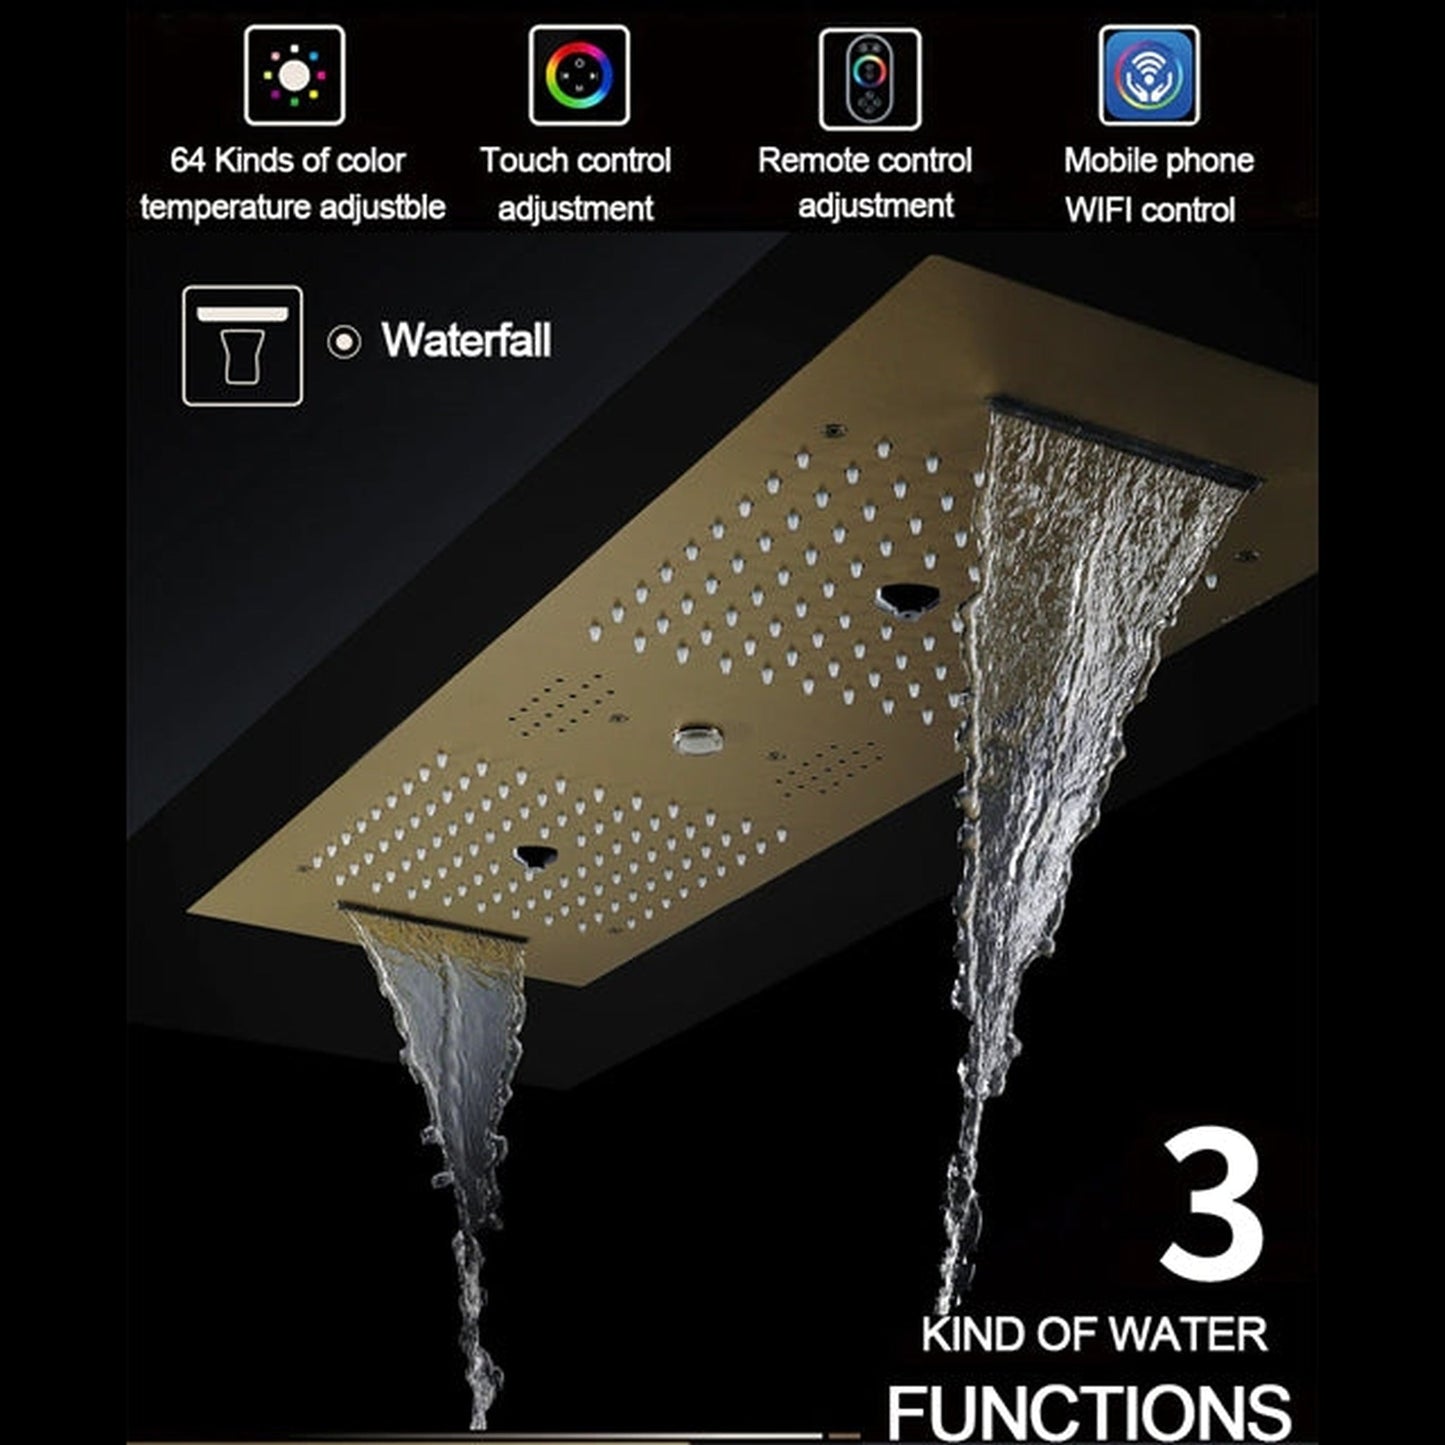 Fontana Varese Brushed Gold Recessed Ceiling Mounted Remote Controlled Thermostatic LED Waterfall Rainfall Water Column Mist Shower System With Hand Shower and 3-Jet Body Sprays